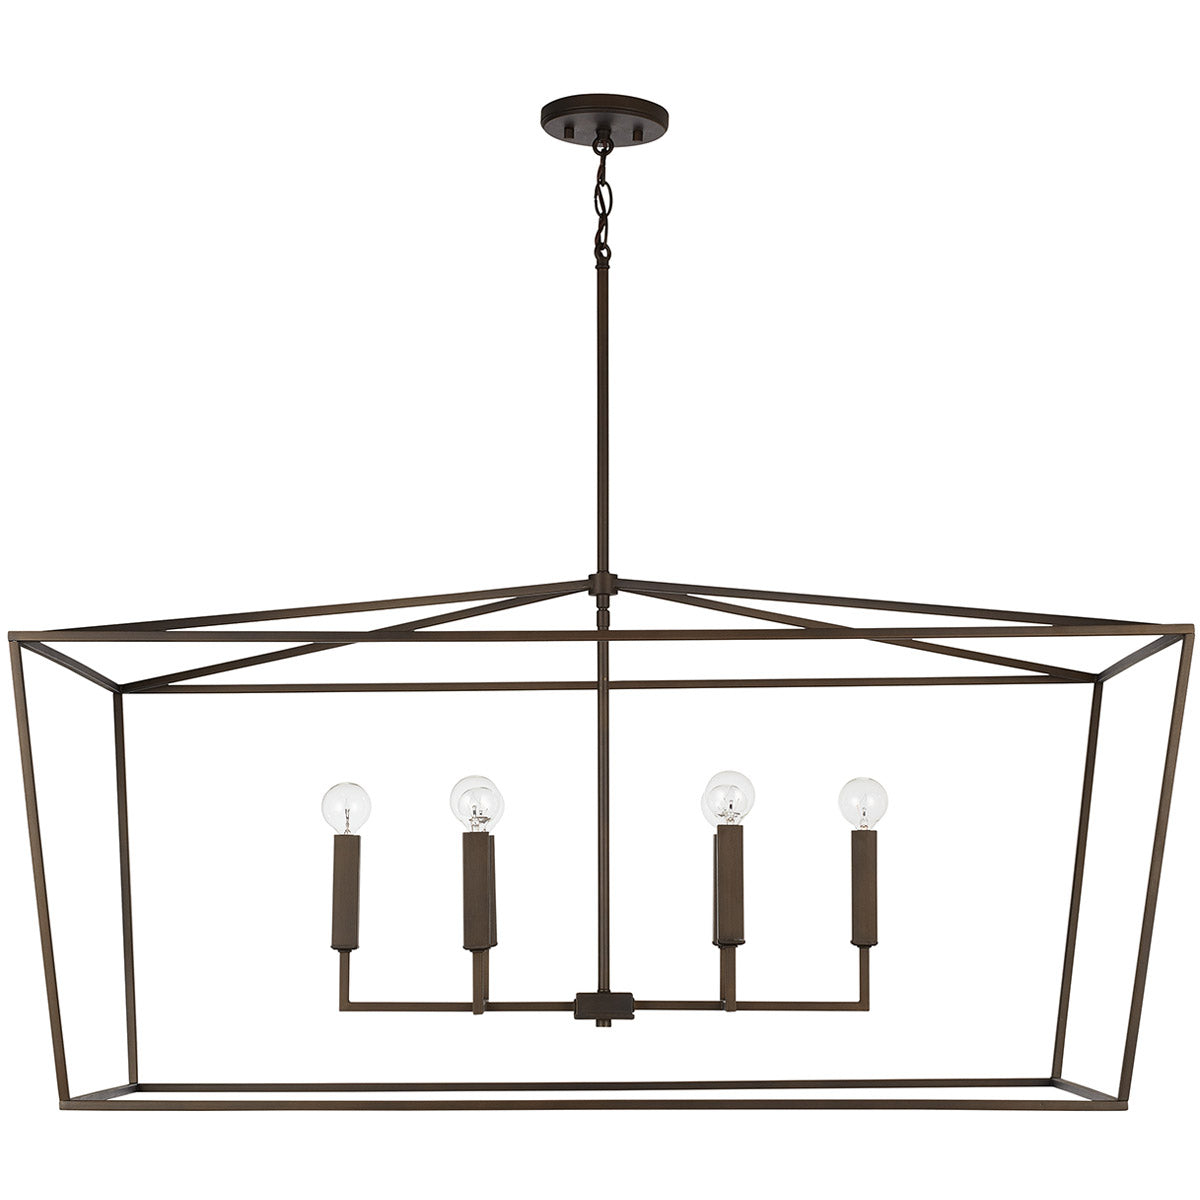 Thea 6 Light 42 inch Oil Rubbed Bronze Island Ceiling Light MRM50